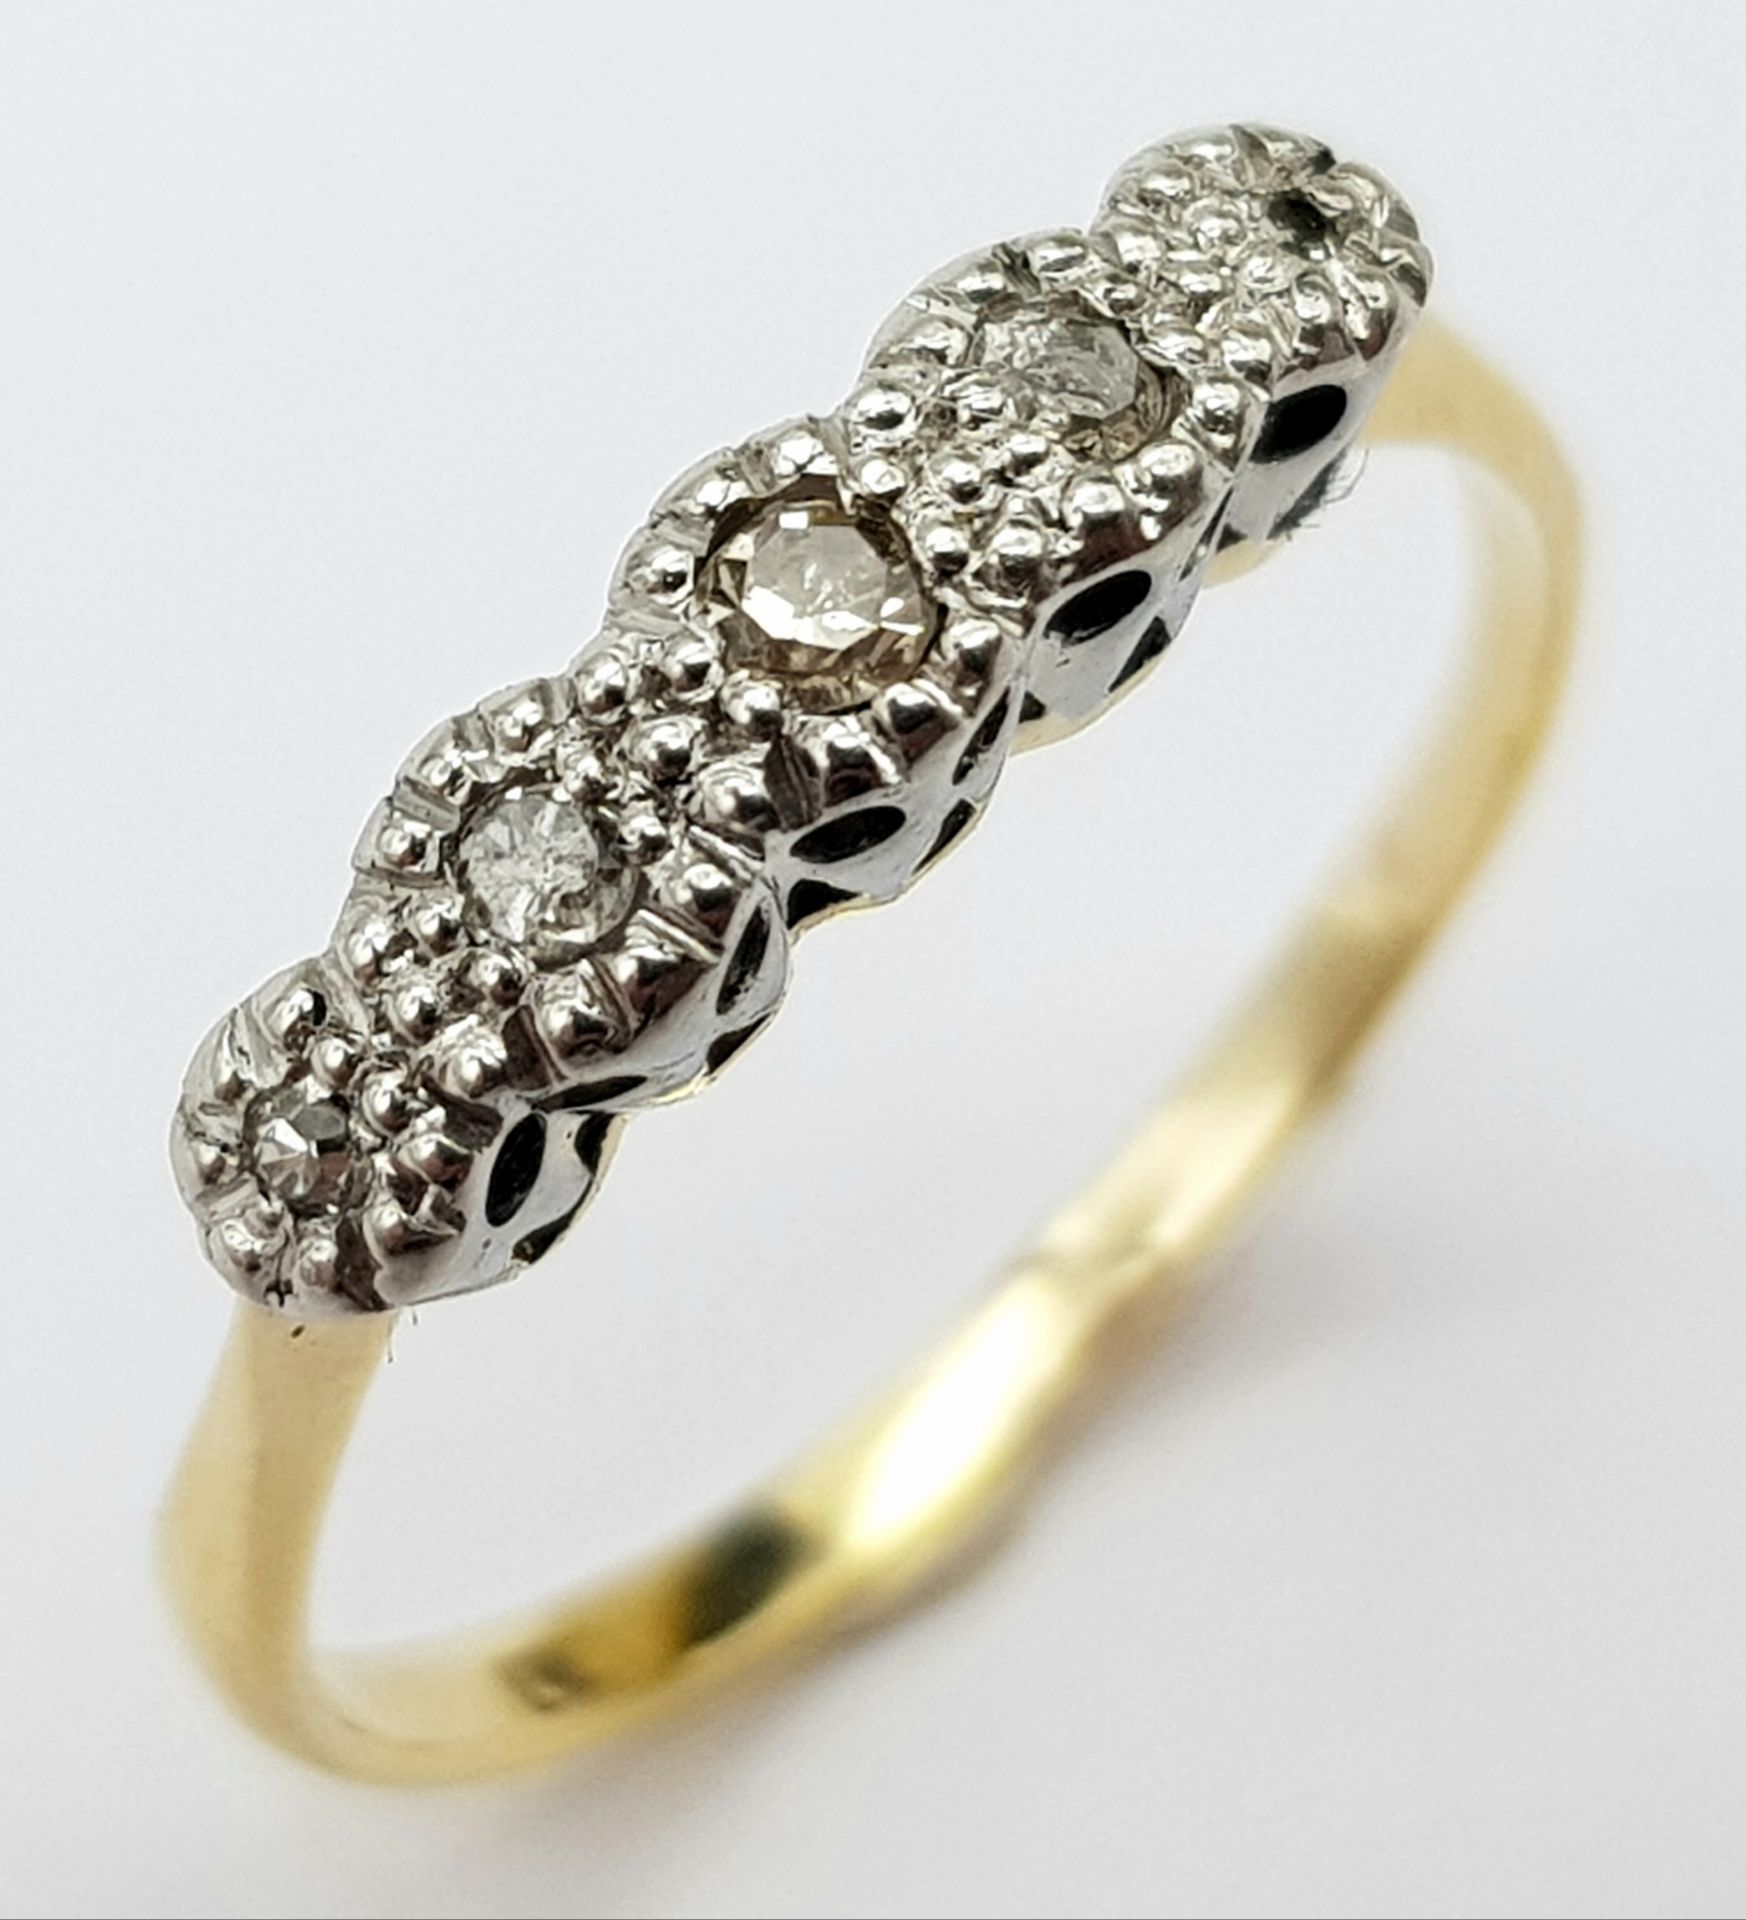 AN 18K YELLOW GOLD VINTAGE DIAMOND 5 STONE RING, Size J, 1.6g total weight. Ref: SC 8066